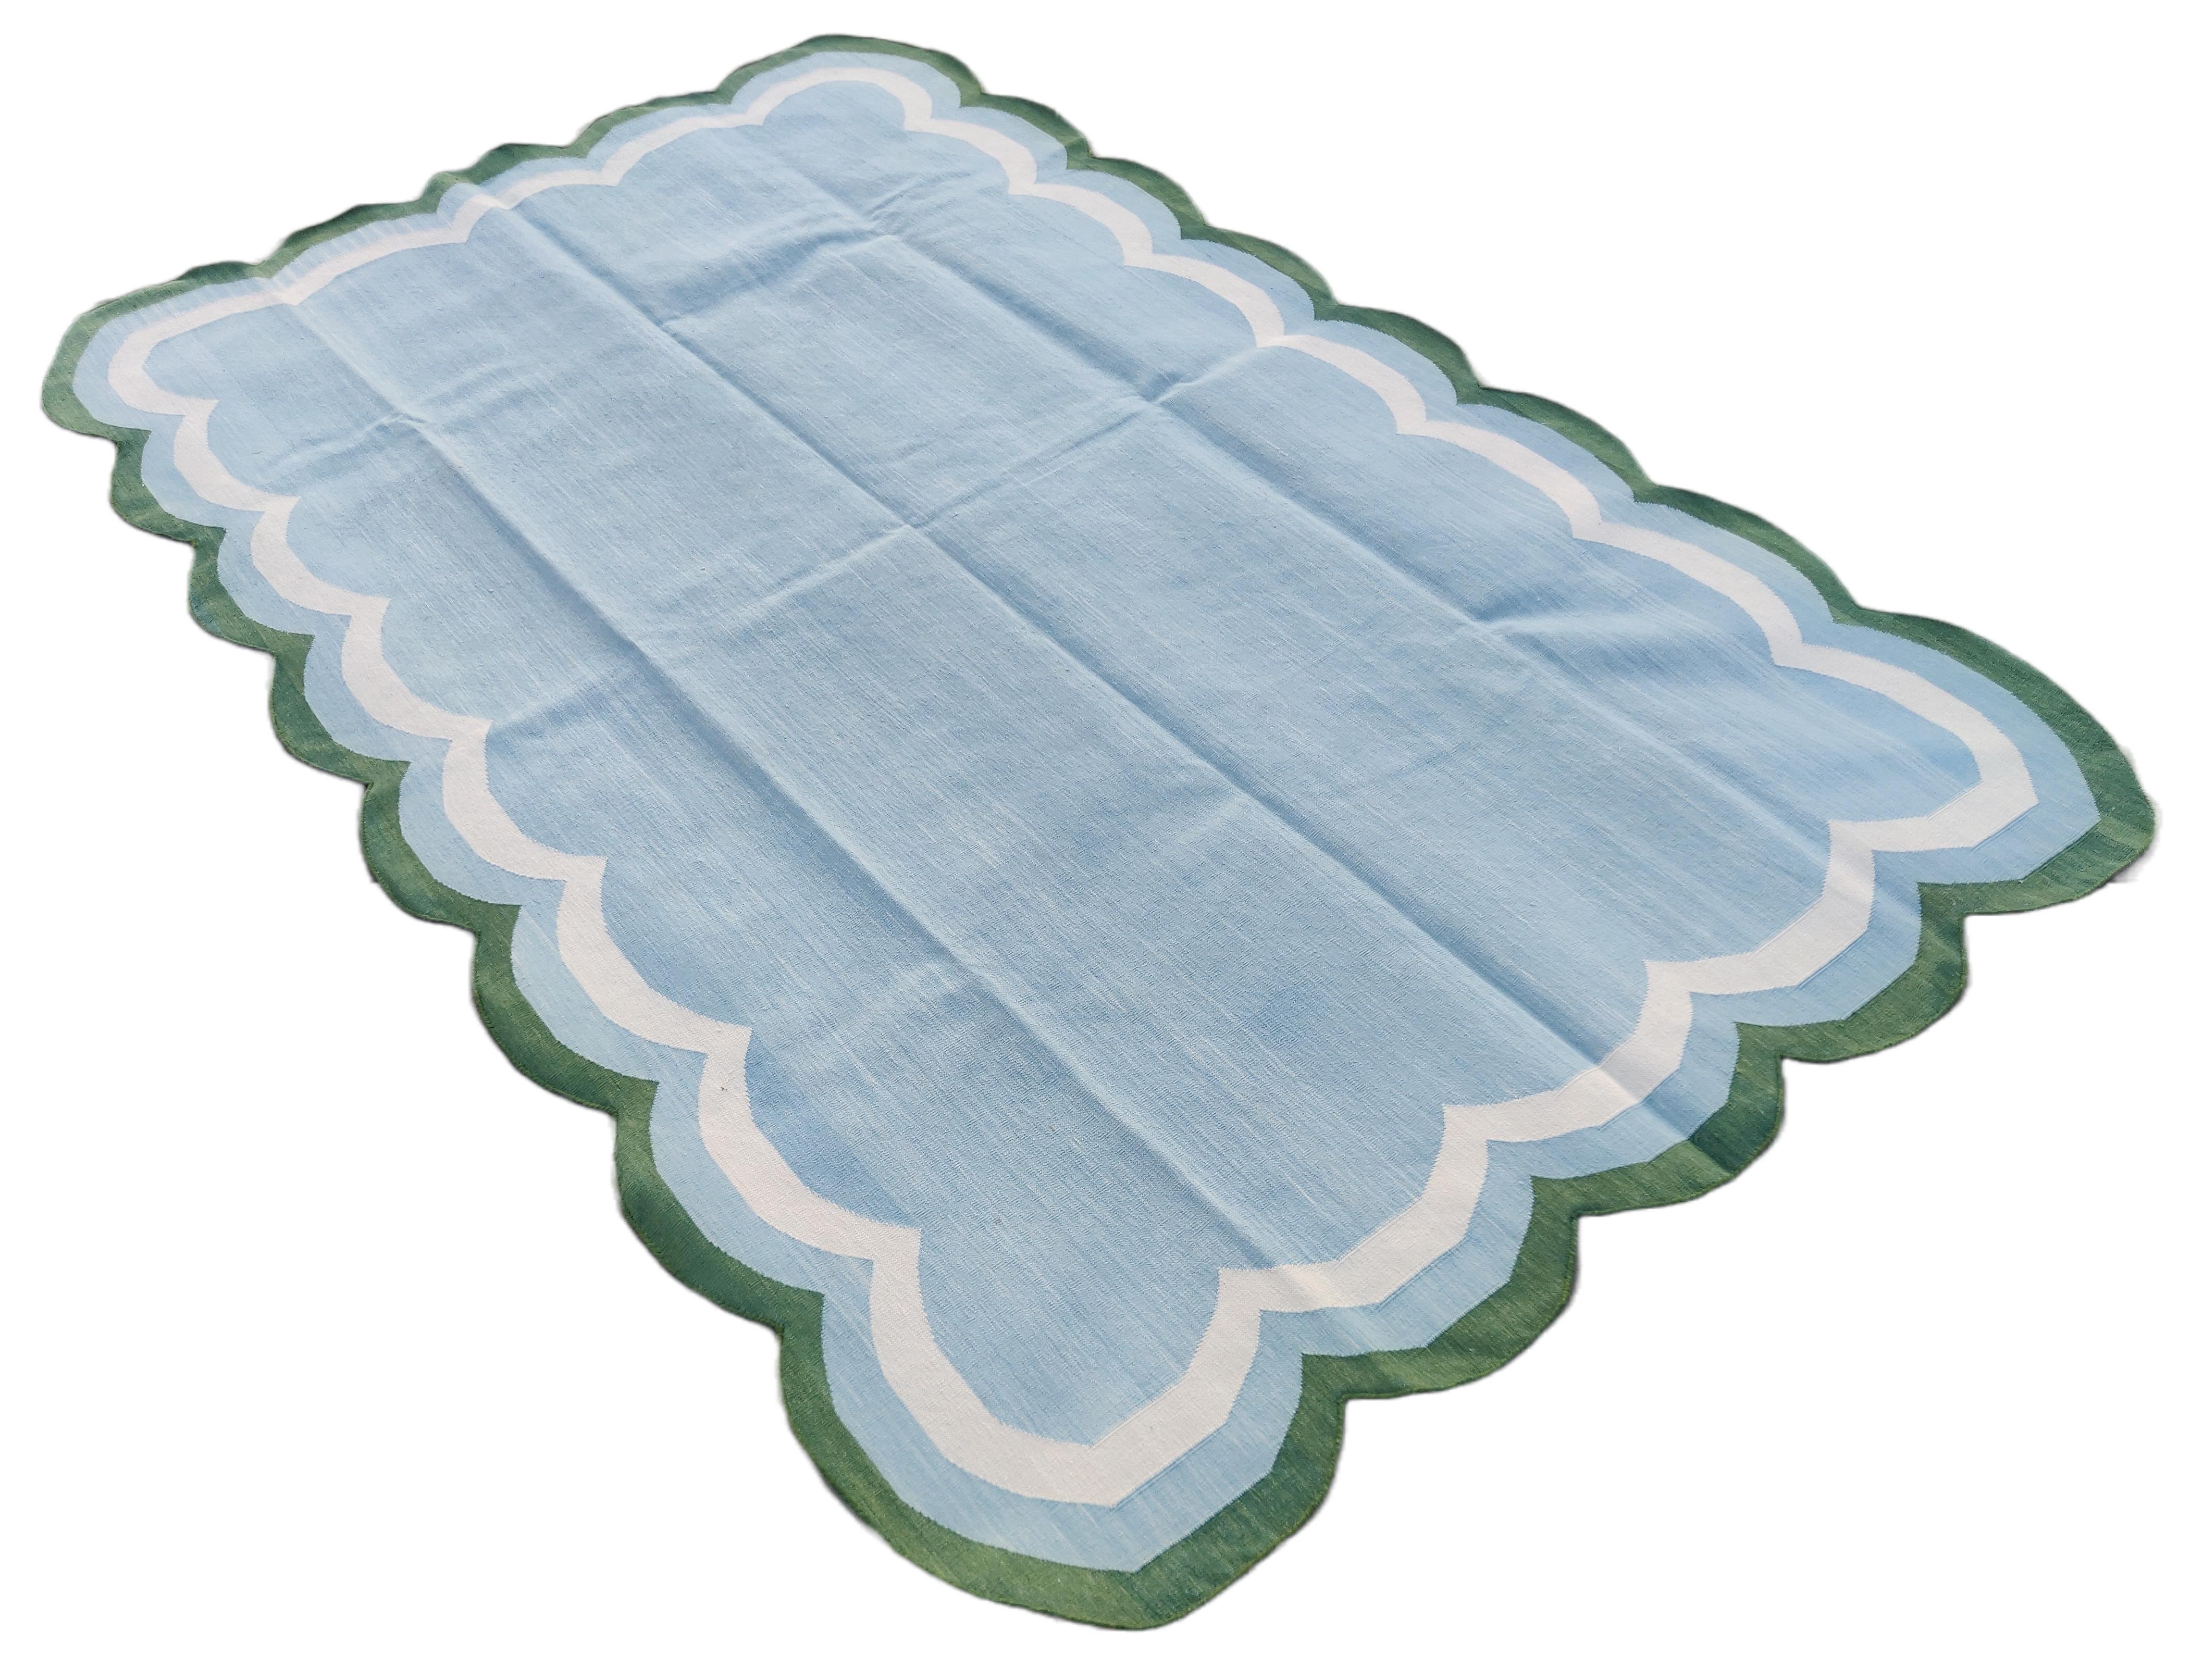 Cotton Vegetable Dyed Sky Blue, Cream And Forest Green Four Sided Scalloped Rug-5'x8' 
(Scallops runs on all Four Sides)
These special flat-weave dhurries are hand-woven with 15 ply 100% cotton yarn. Due to the special manufacturing techniques used